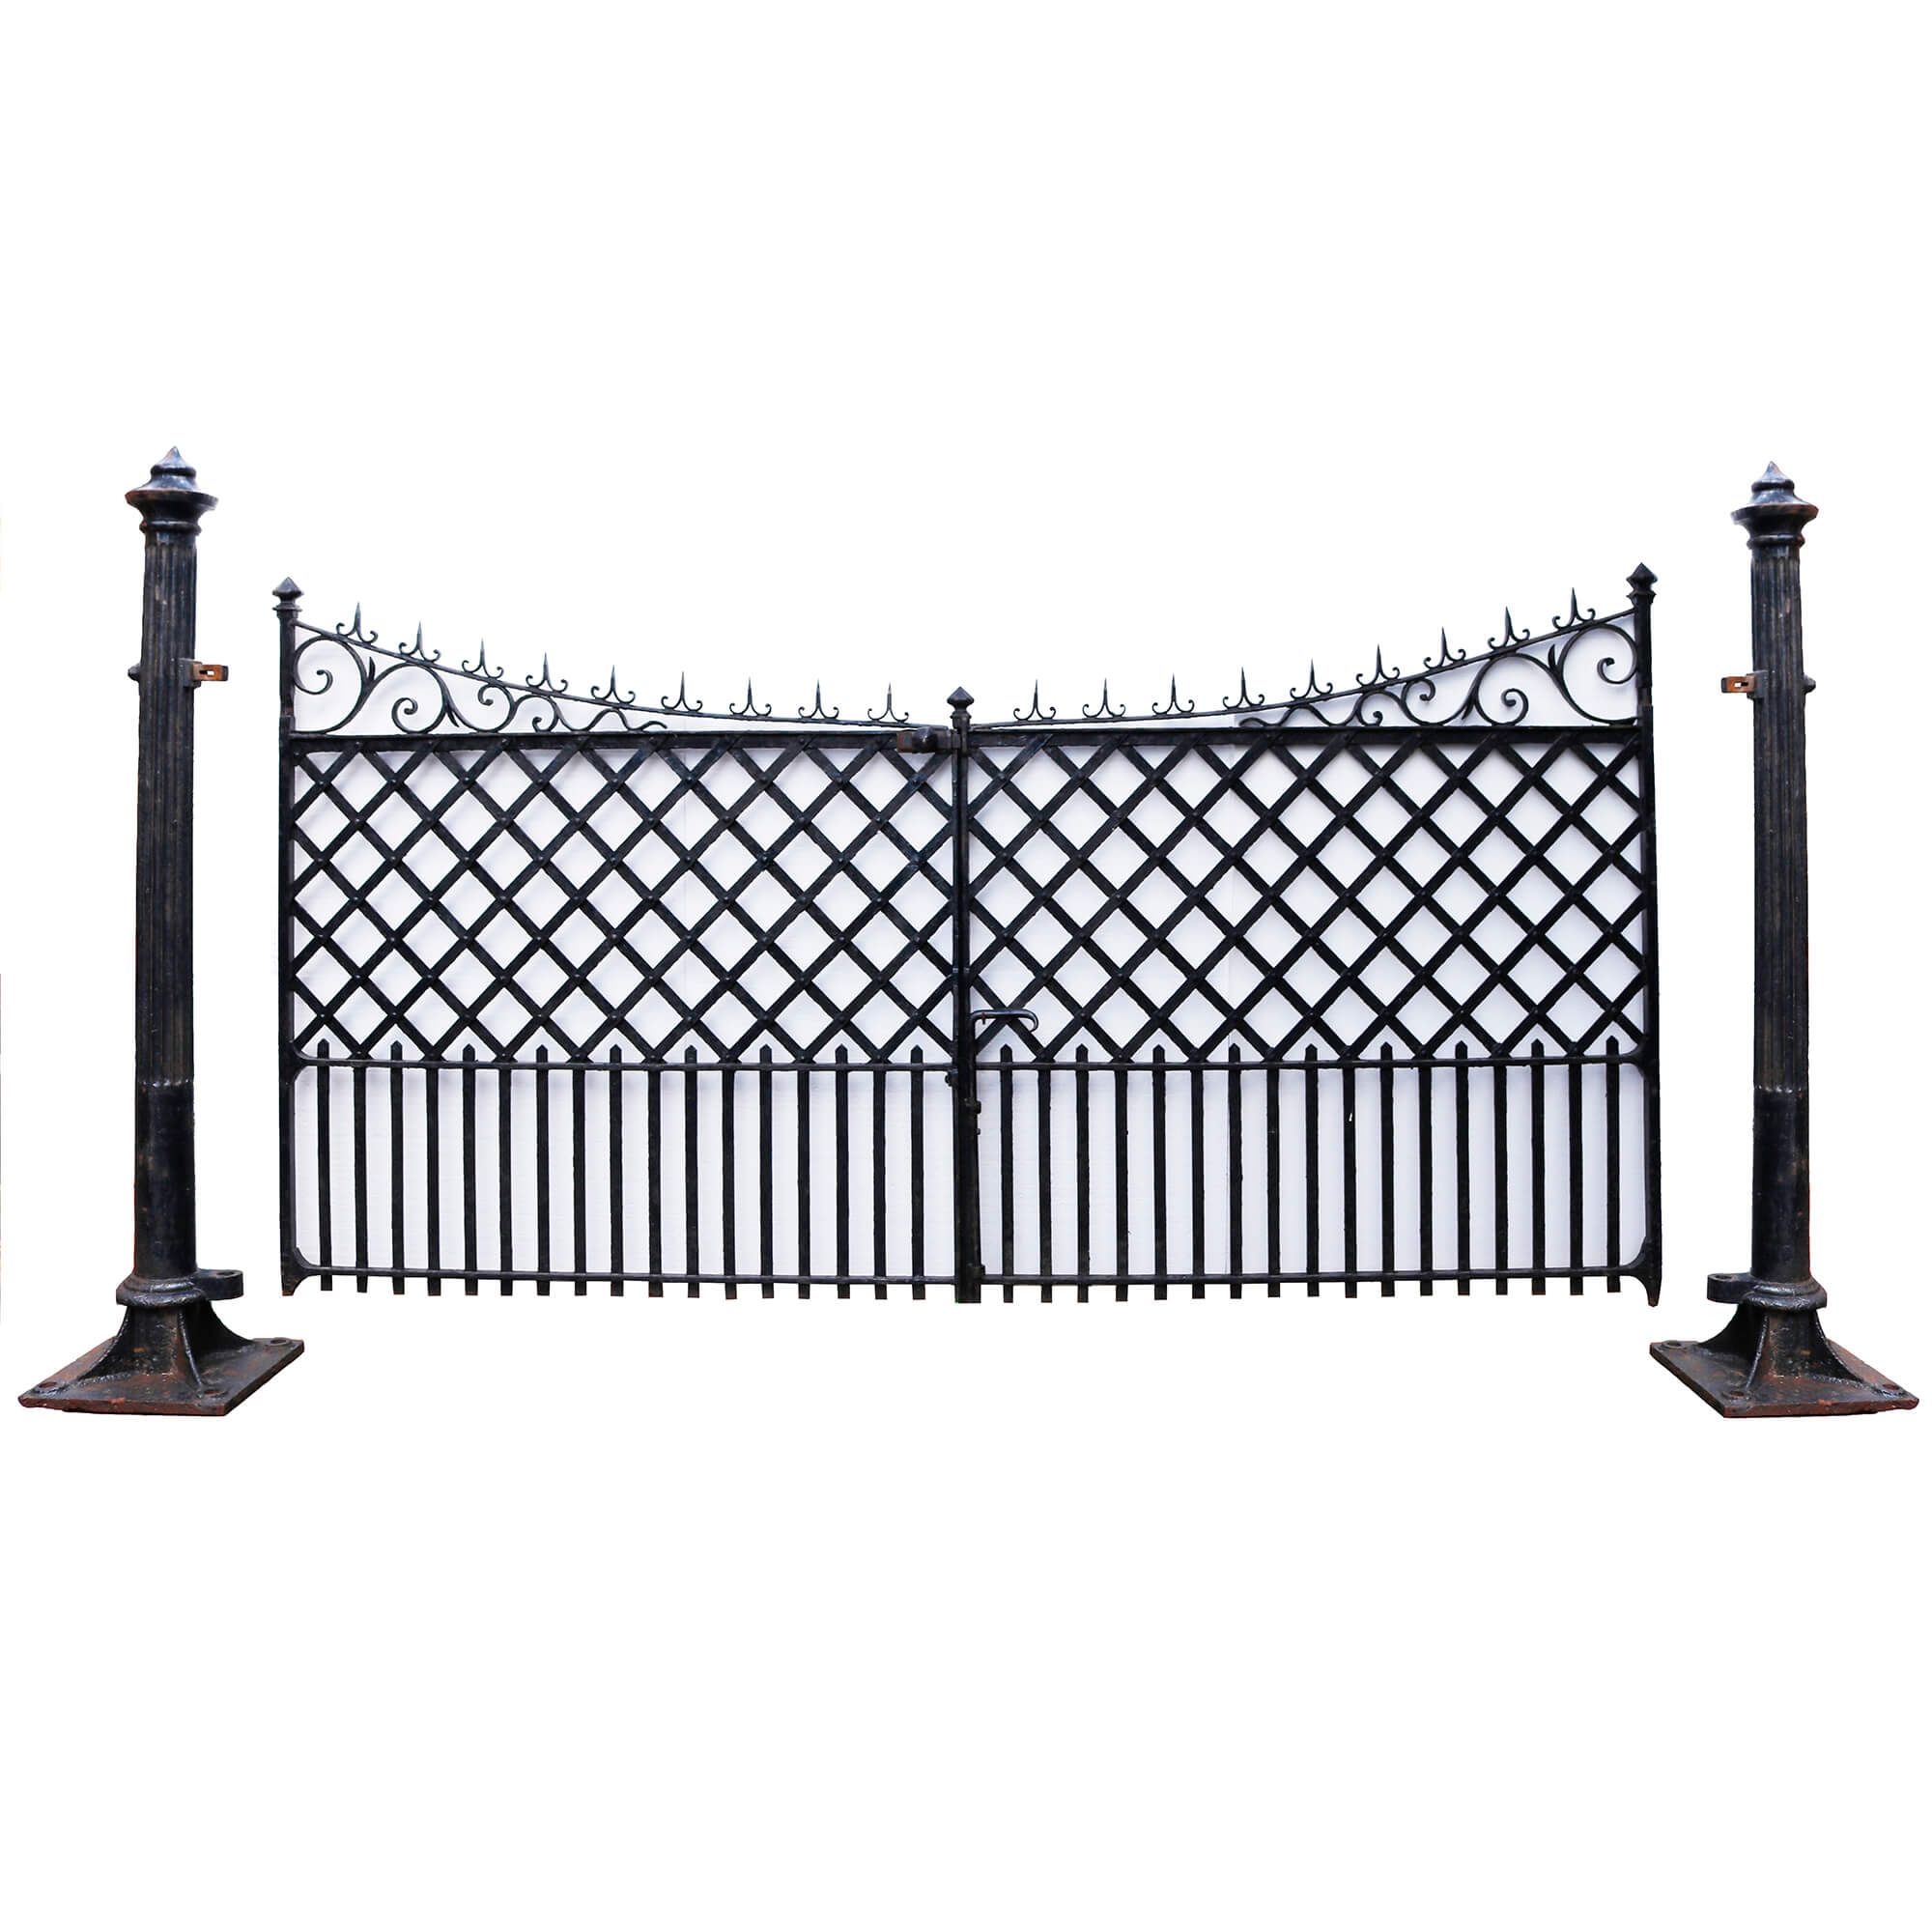 Set of Wrought Iron Driveway Gates and Posts